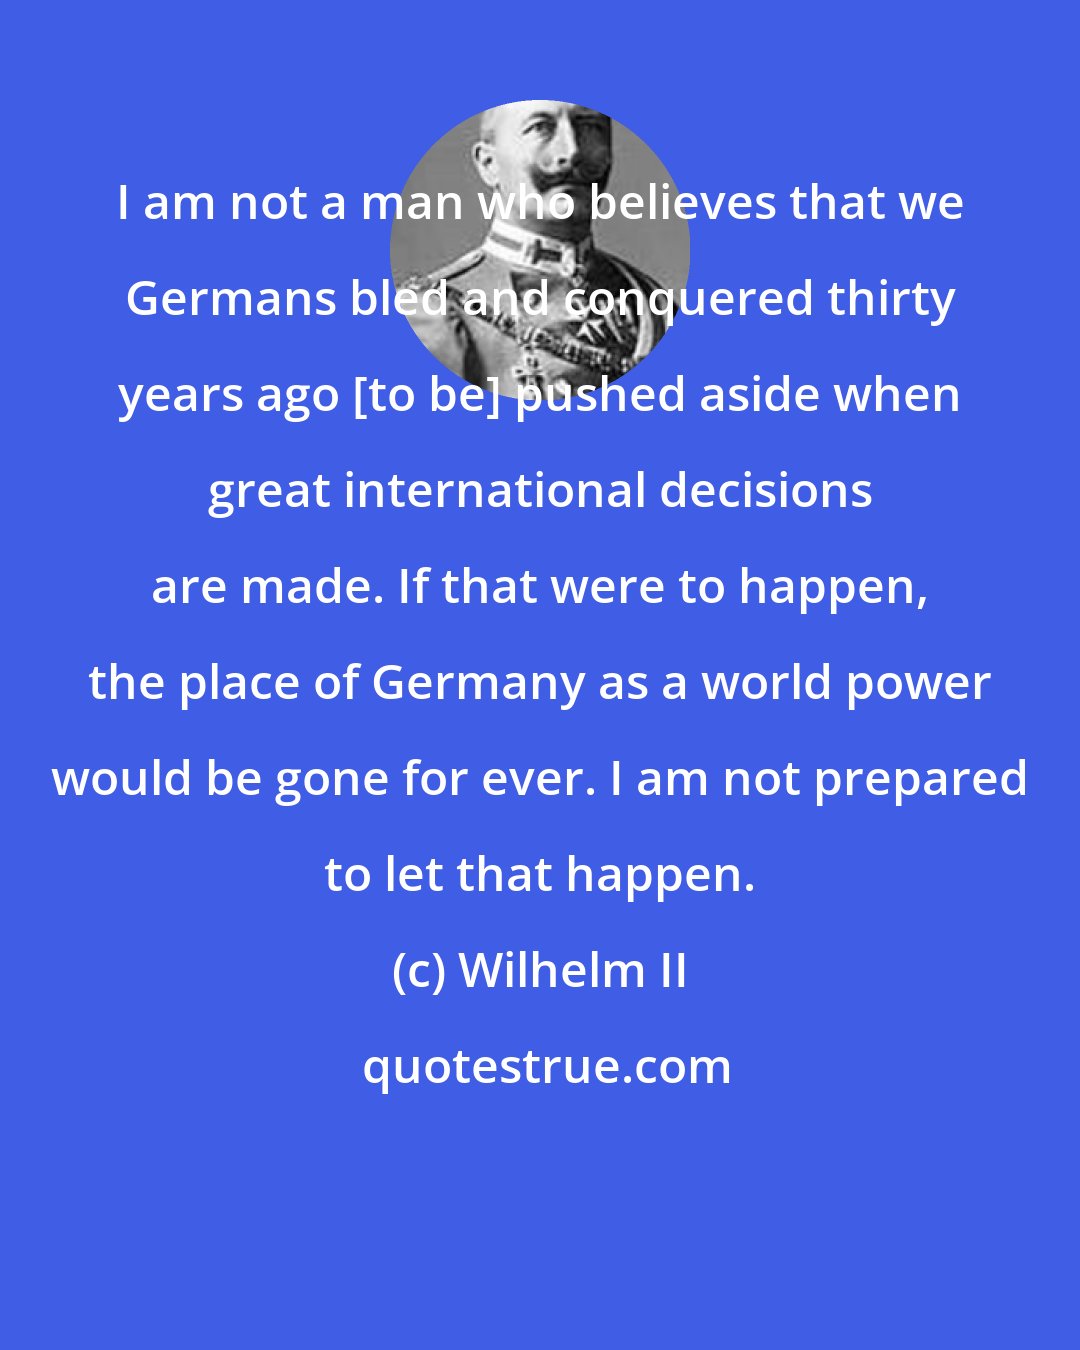 Wilhelm II: I am not a man who believes that we Germans bled and conquered thirty years ago [to be] pushed aside when great international decisions are made. If that were to happen, the place of Germany as a world power would be gone for ever. I am not prepared to let that happen.